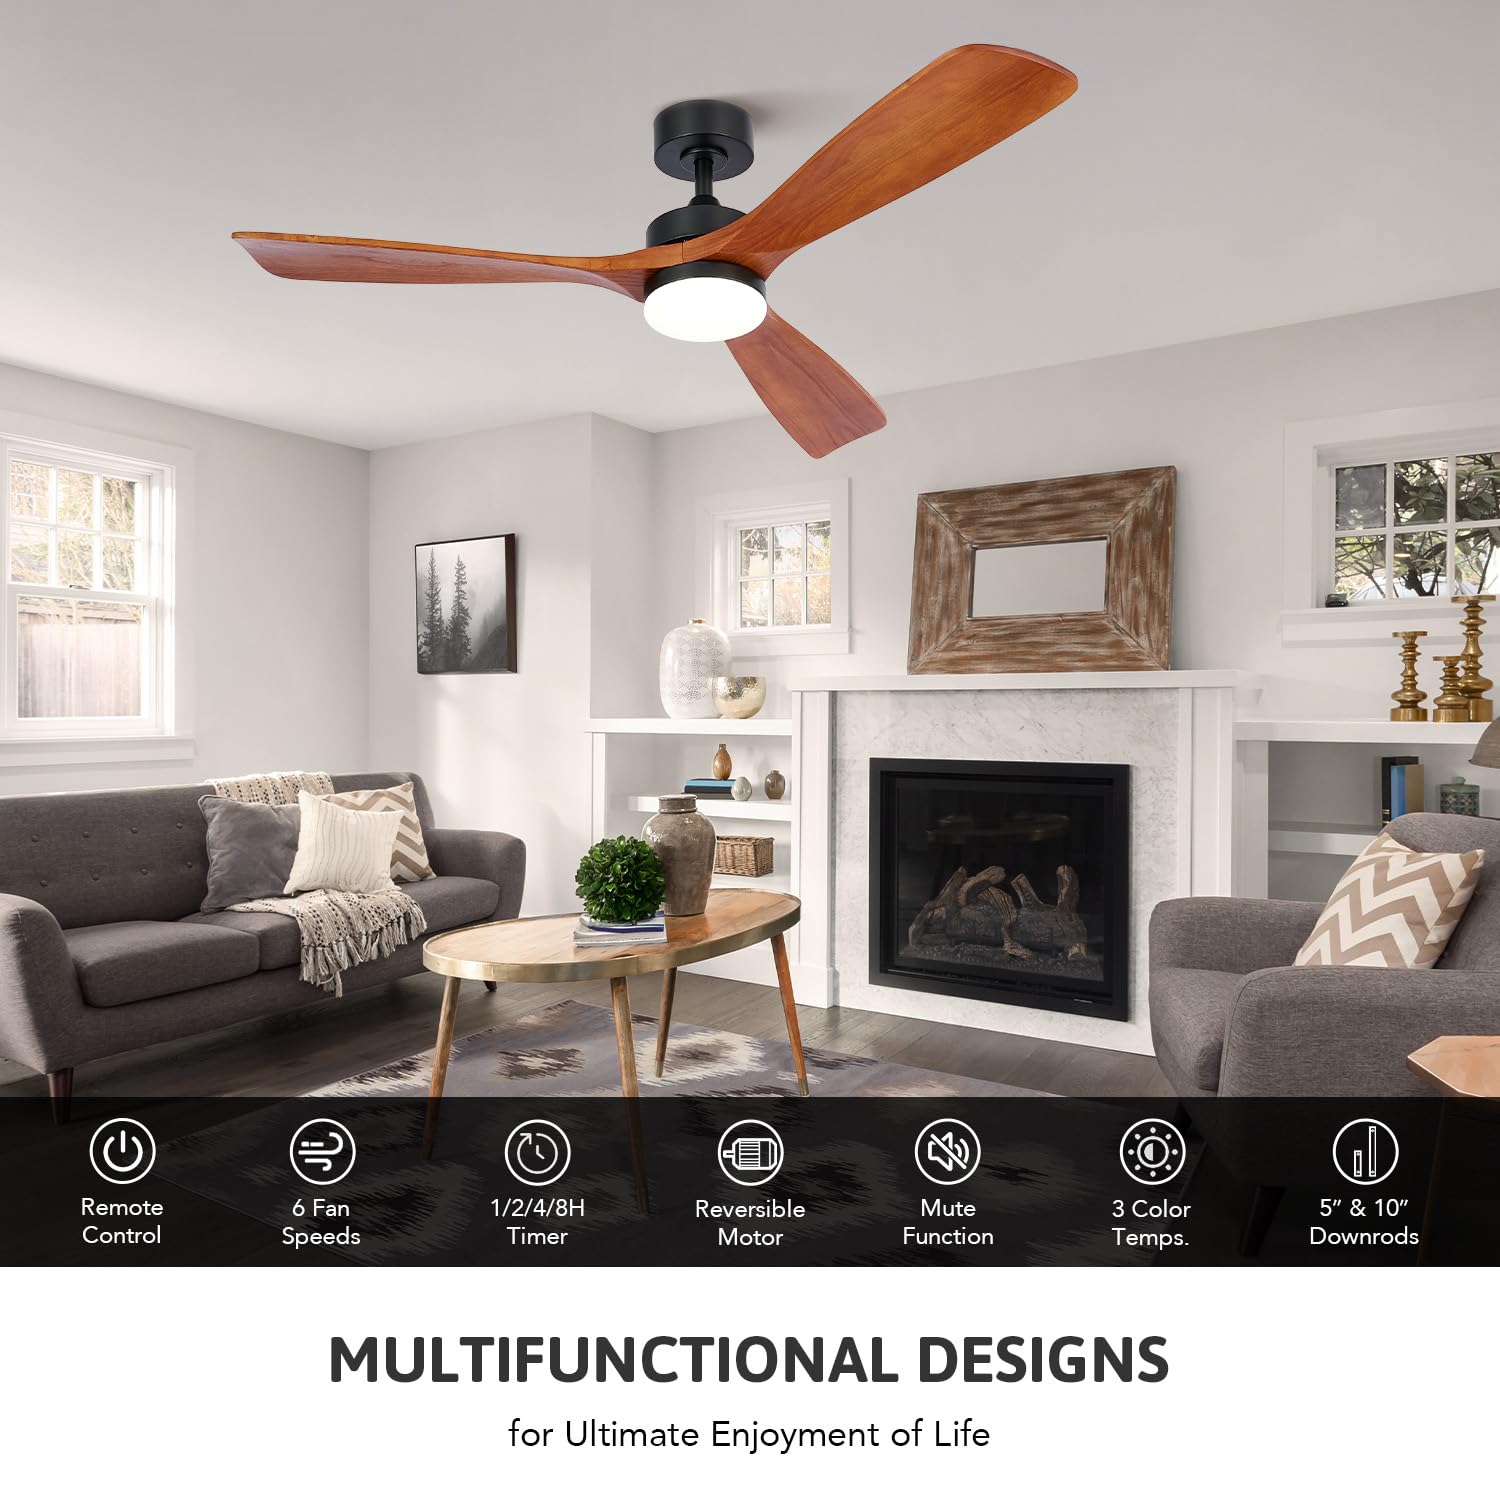 VONLUCE Wood Ceiling Fans with Lights, 52 Inch Outdoor Ceiling Fan with Remote, 6 Speed Reversible Noiseless DC Motor, Modern Ceiling Fan for Indoor Bedroom Farmhouse Patios, Walnut